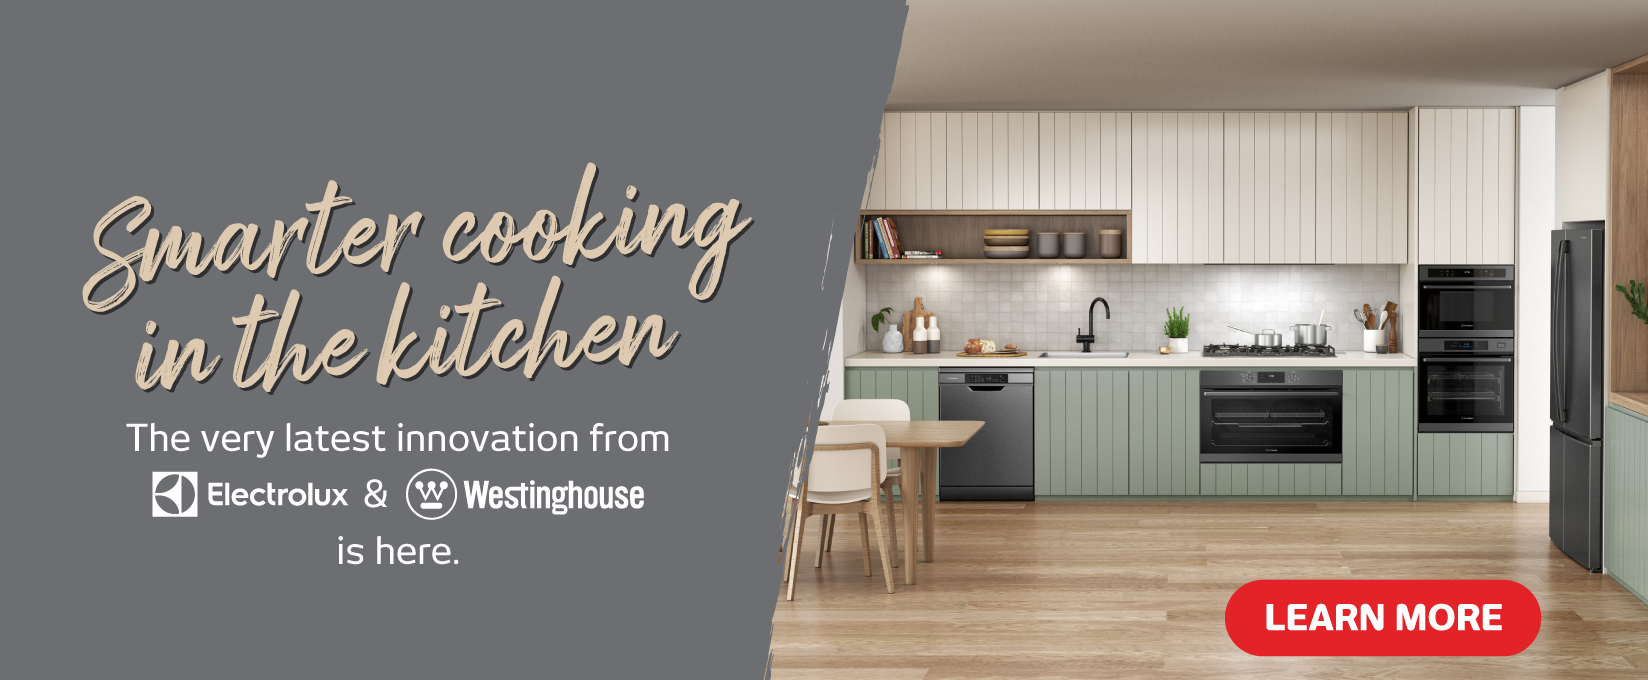 Electrolux & Westinghouse Cooking Guide at Retravision